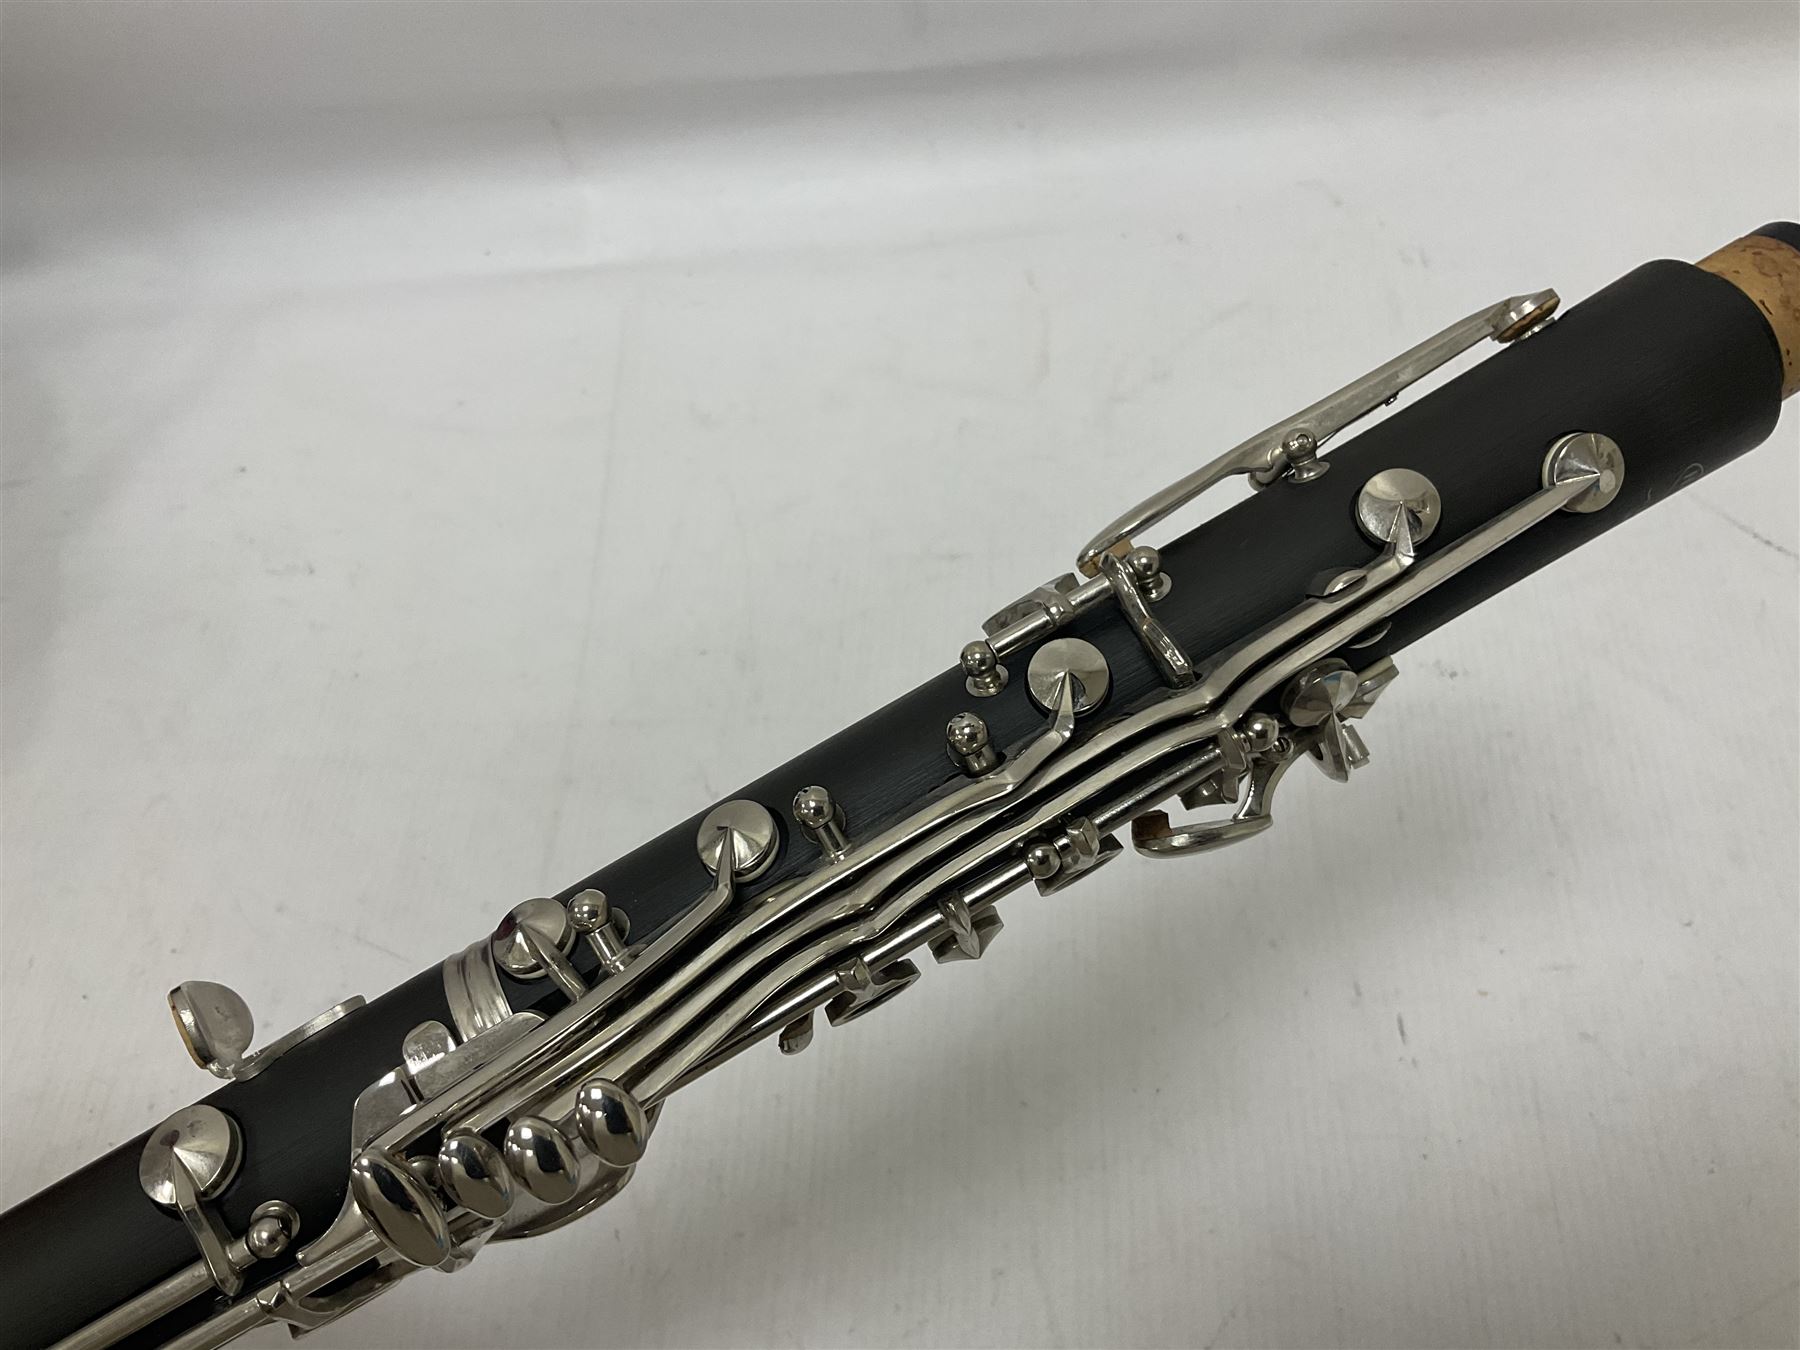 Hanson B Flat clarinet in a fitted case with accessories and three boxes of Vandoren reeds - Image 12 of 21